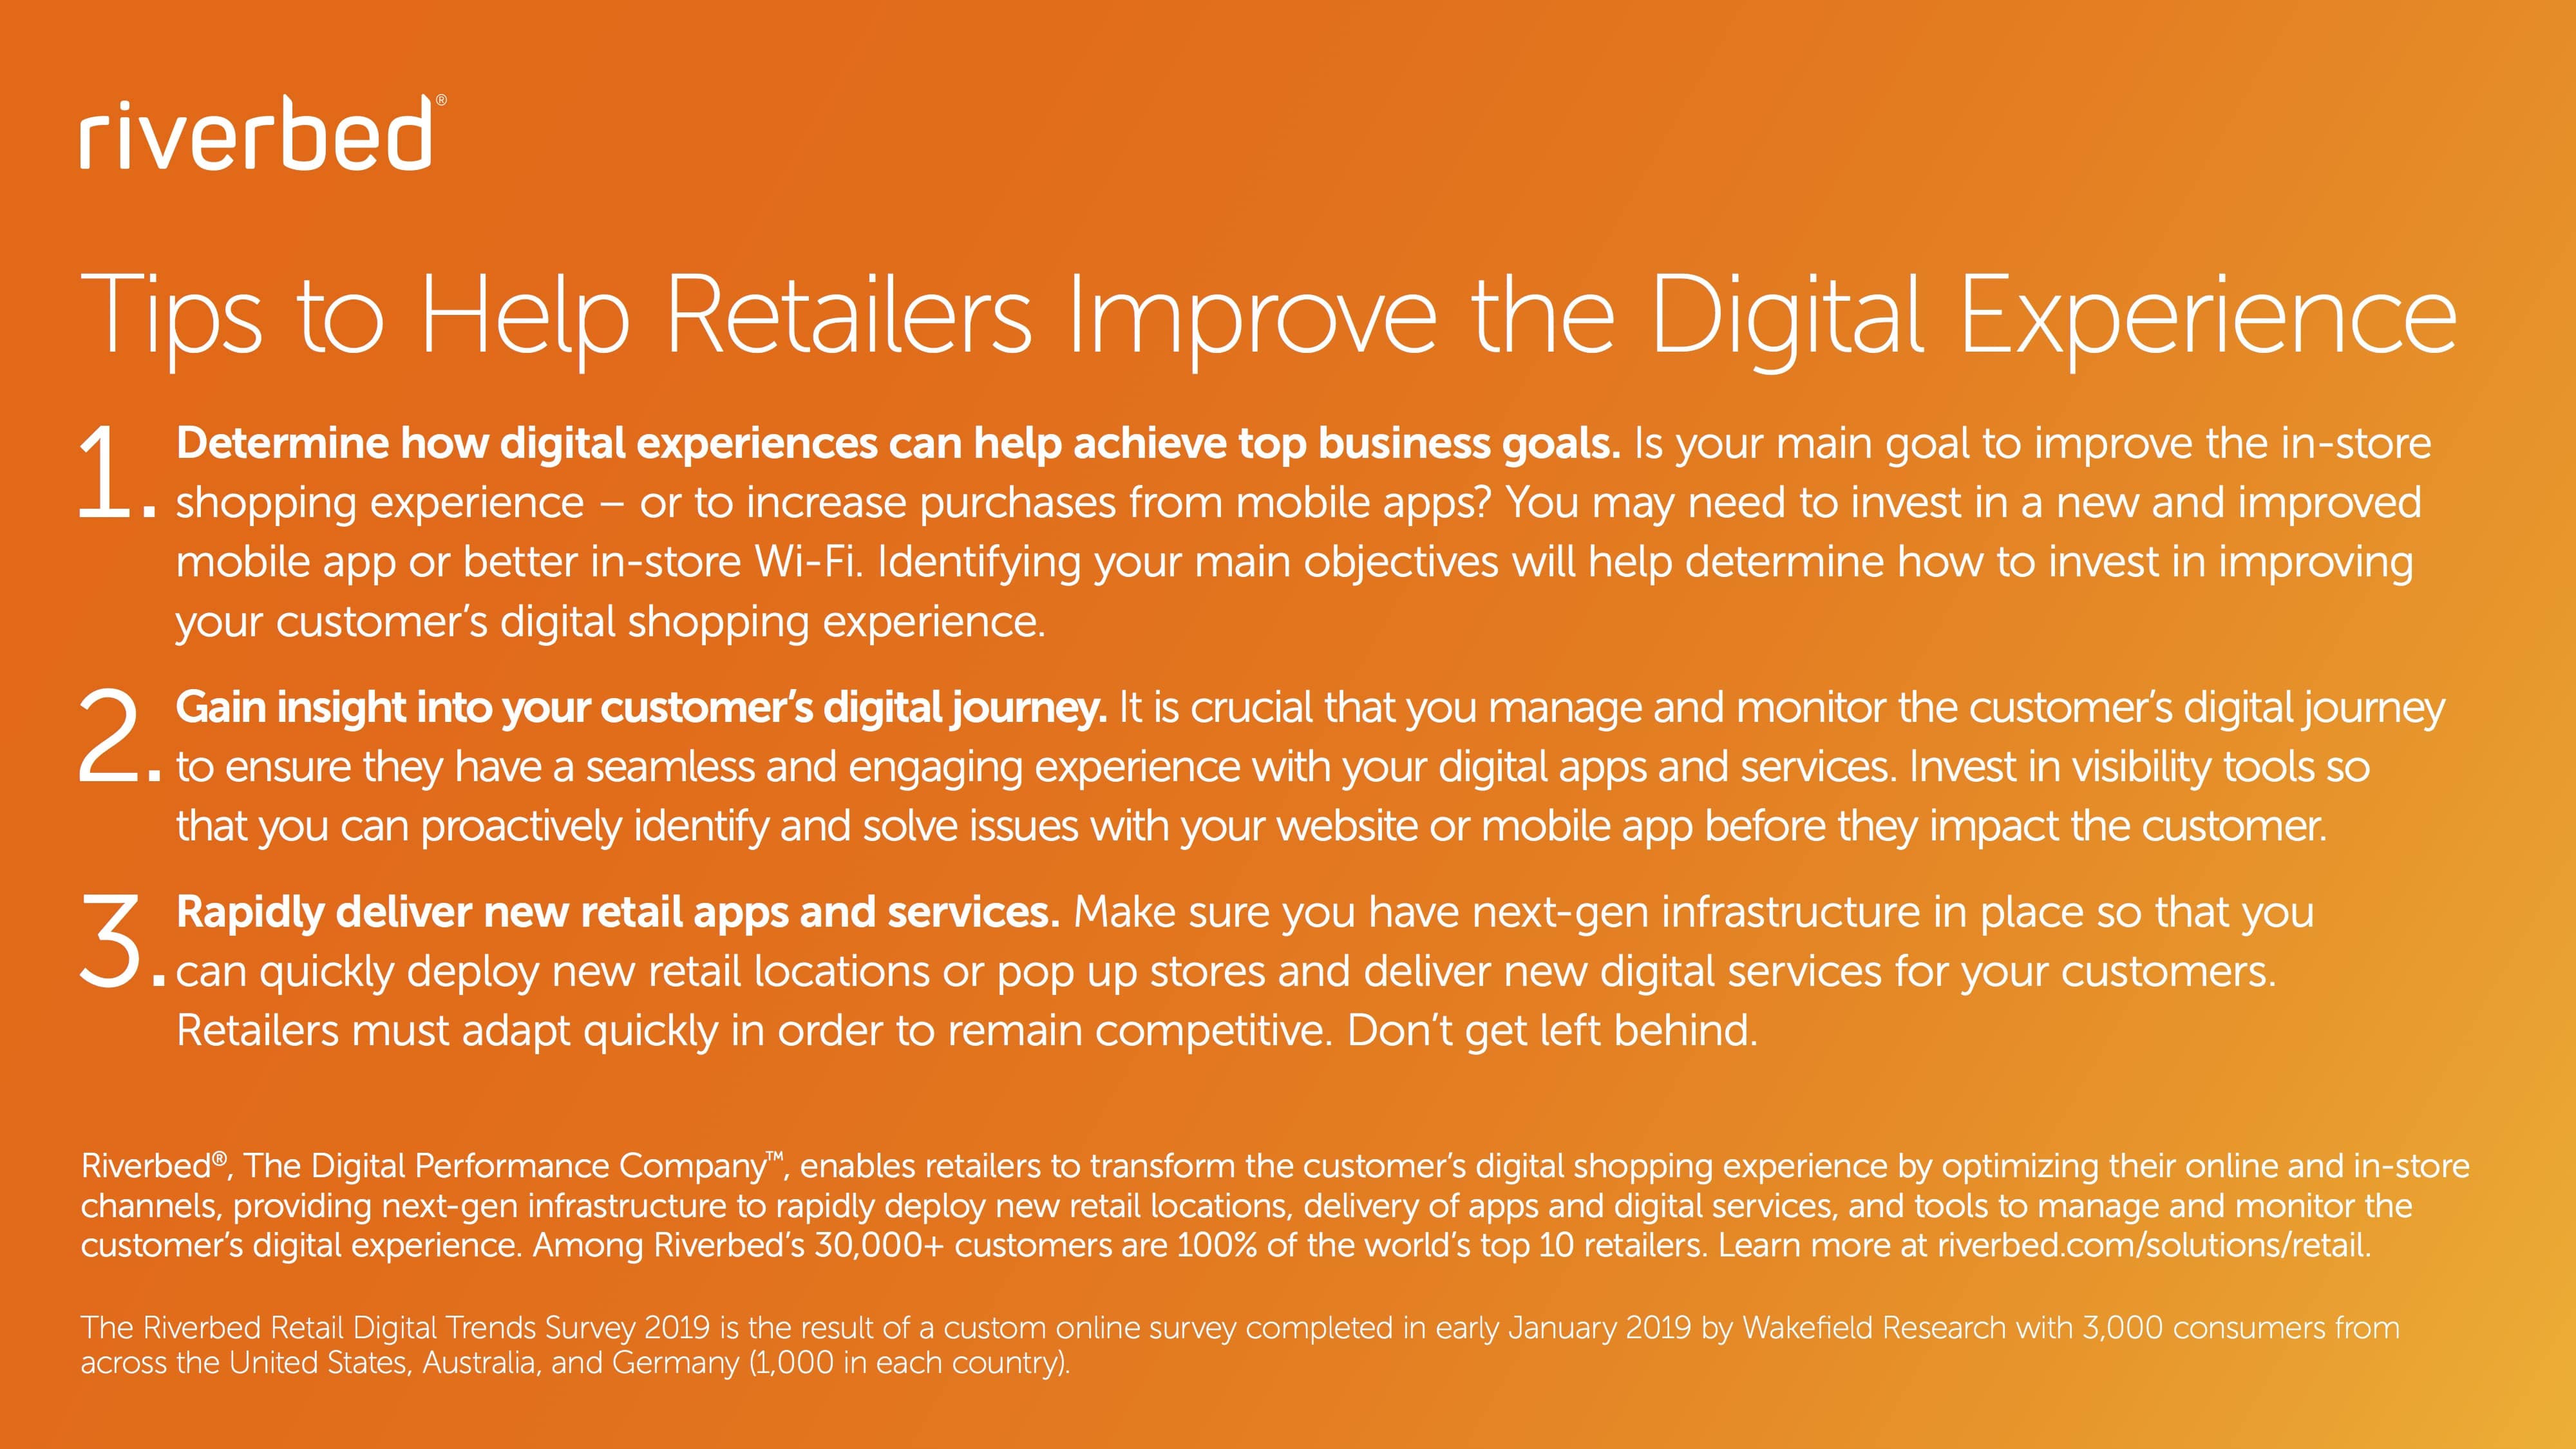 Is a positive digital shopping experience as important as a great price?